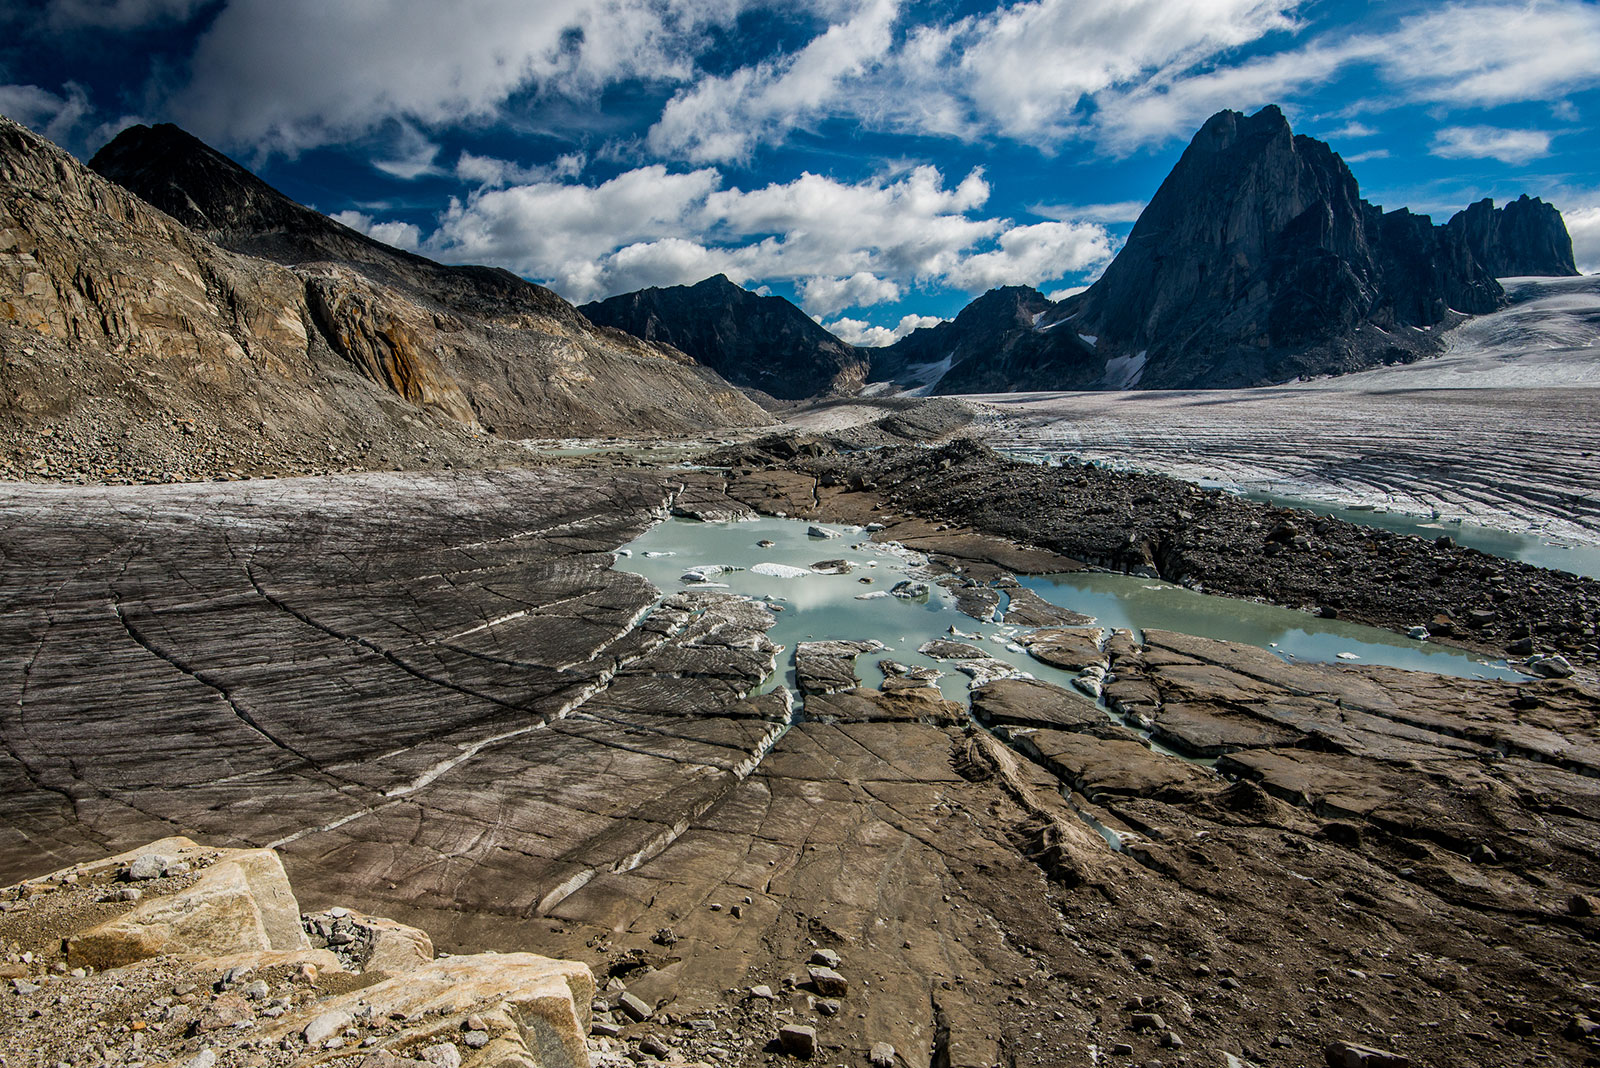 On Assignment: Canadian Geographic Magazine - Views from the Top